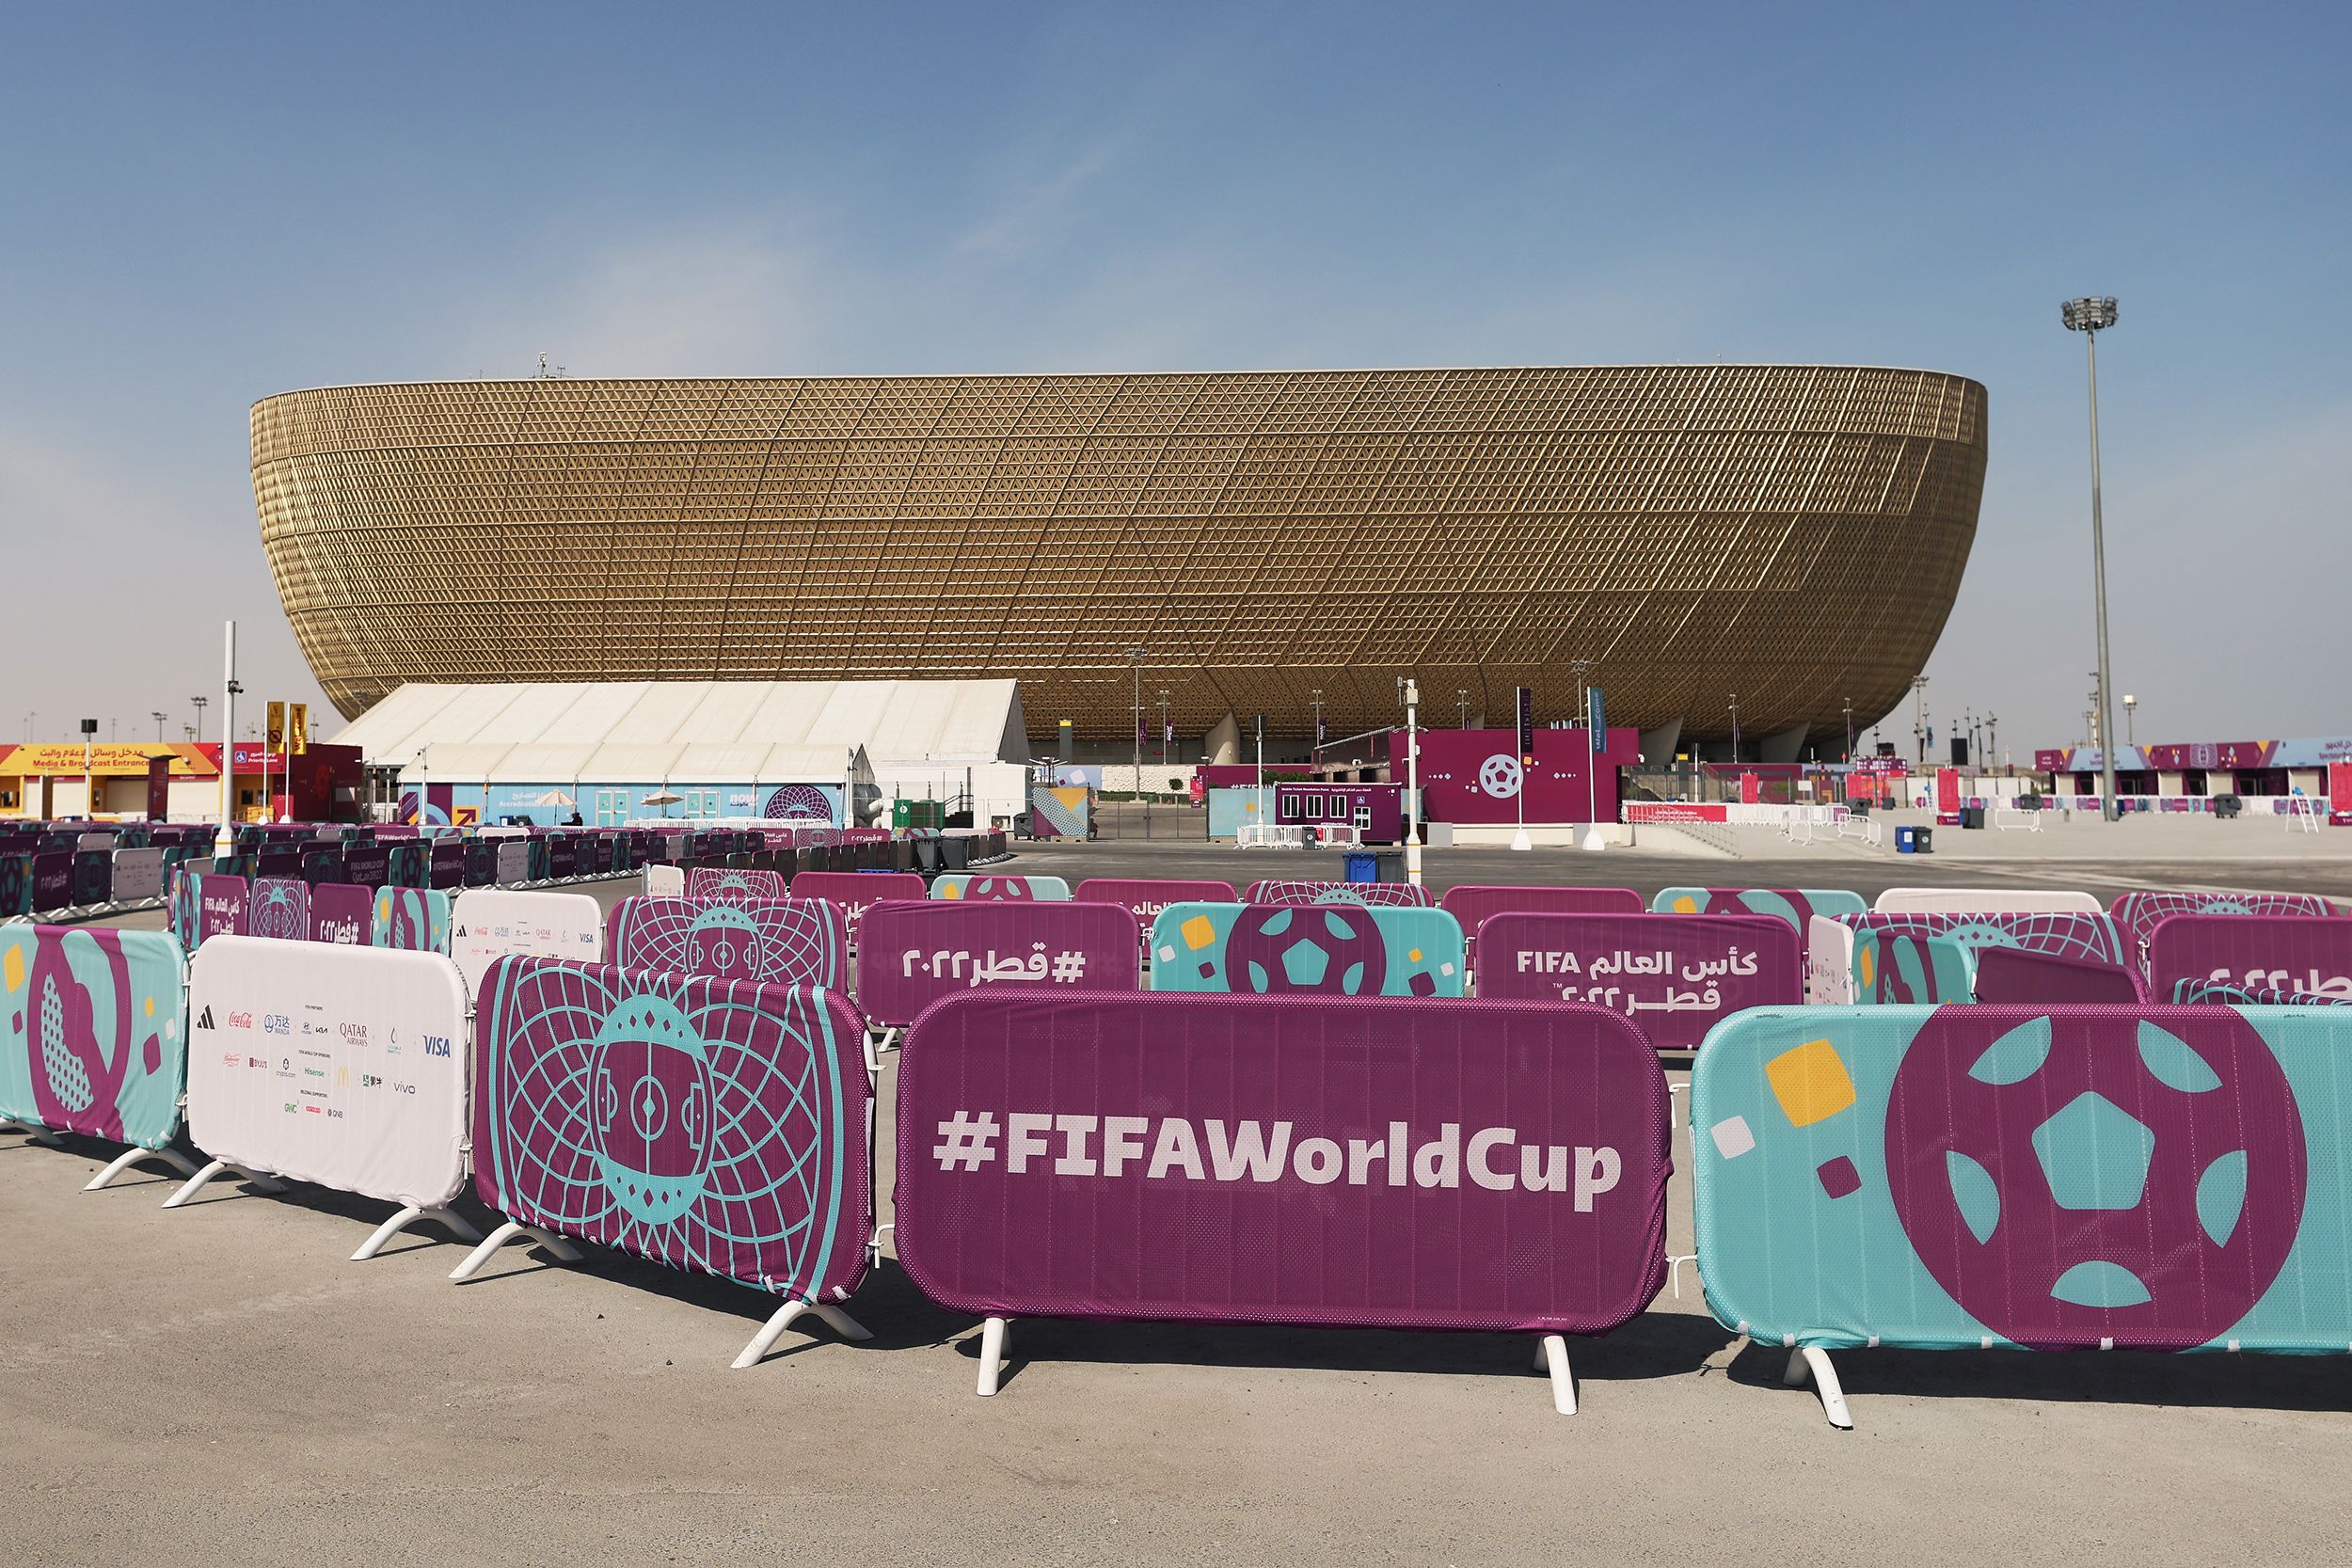 Why is the 2022 Qatar World Cup controversial? Here's a list of